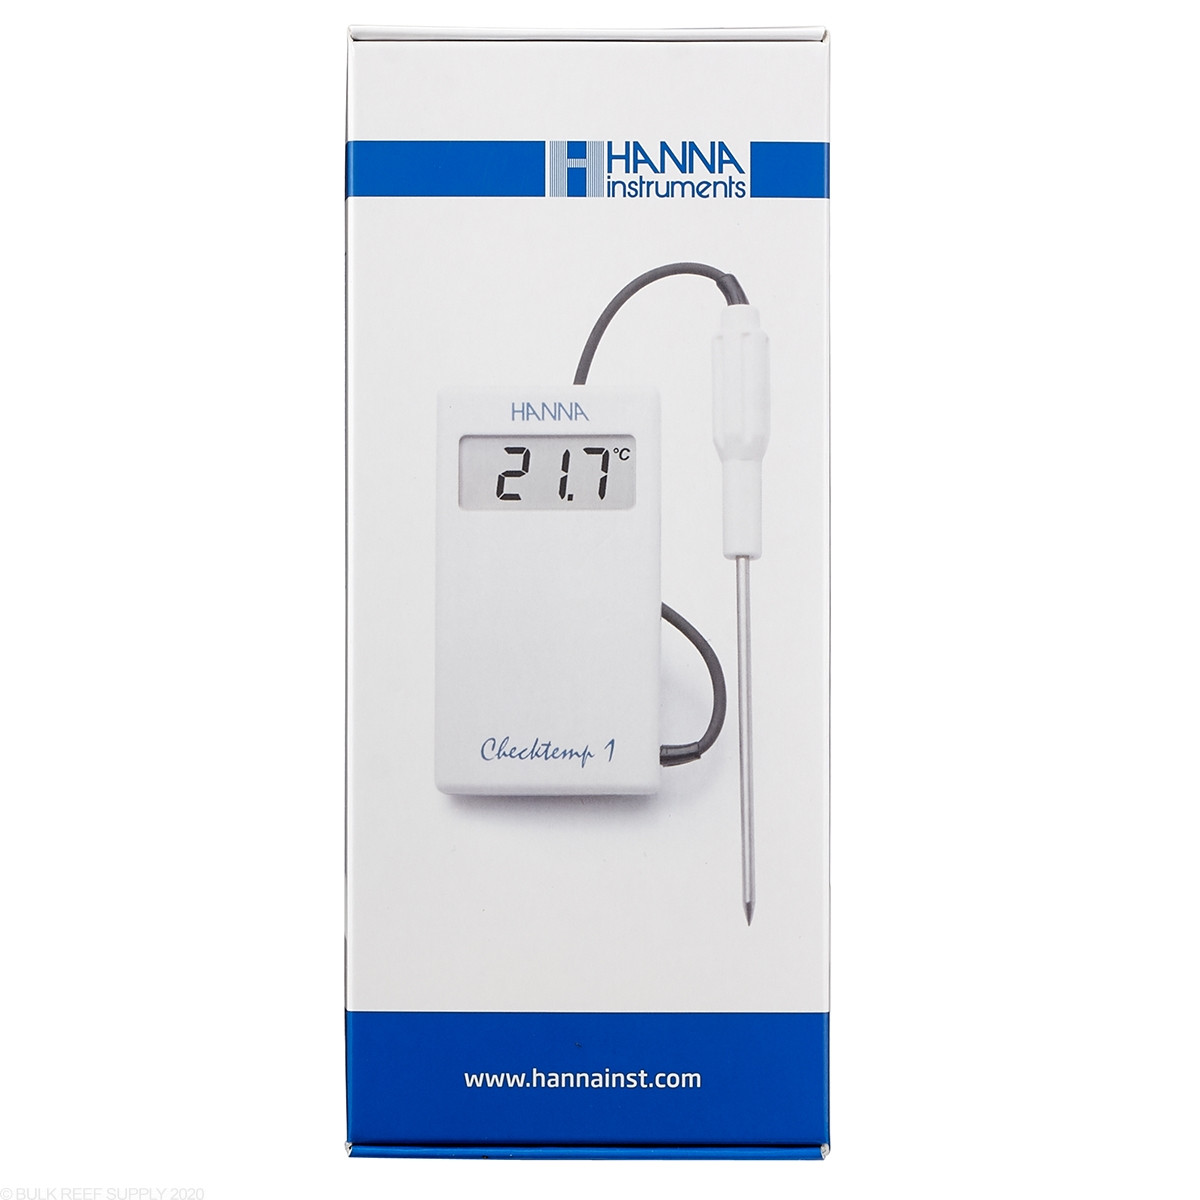 Hanna thermometer